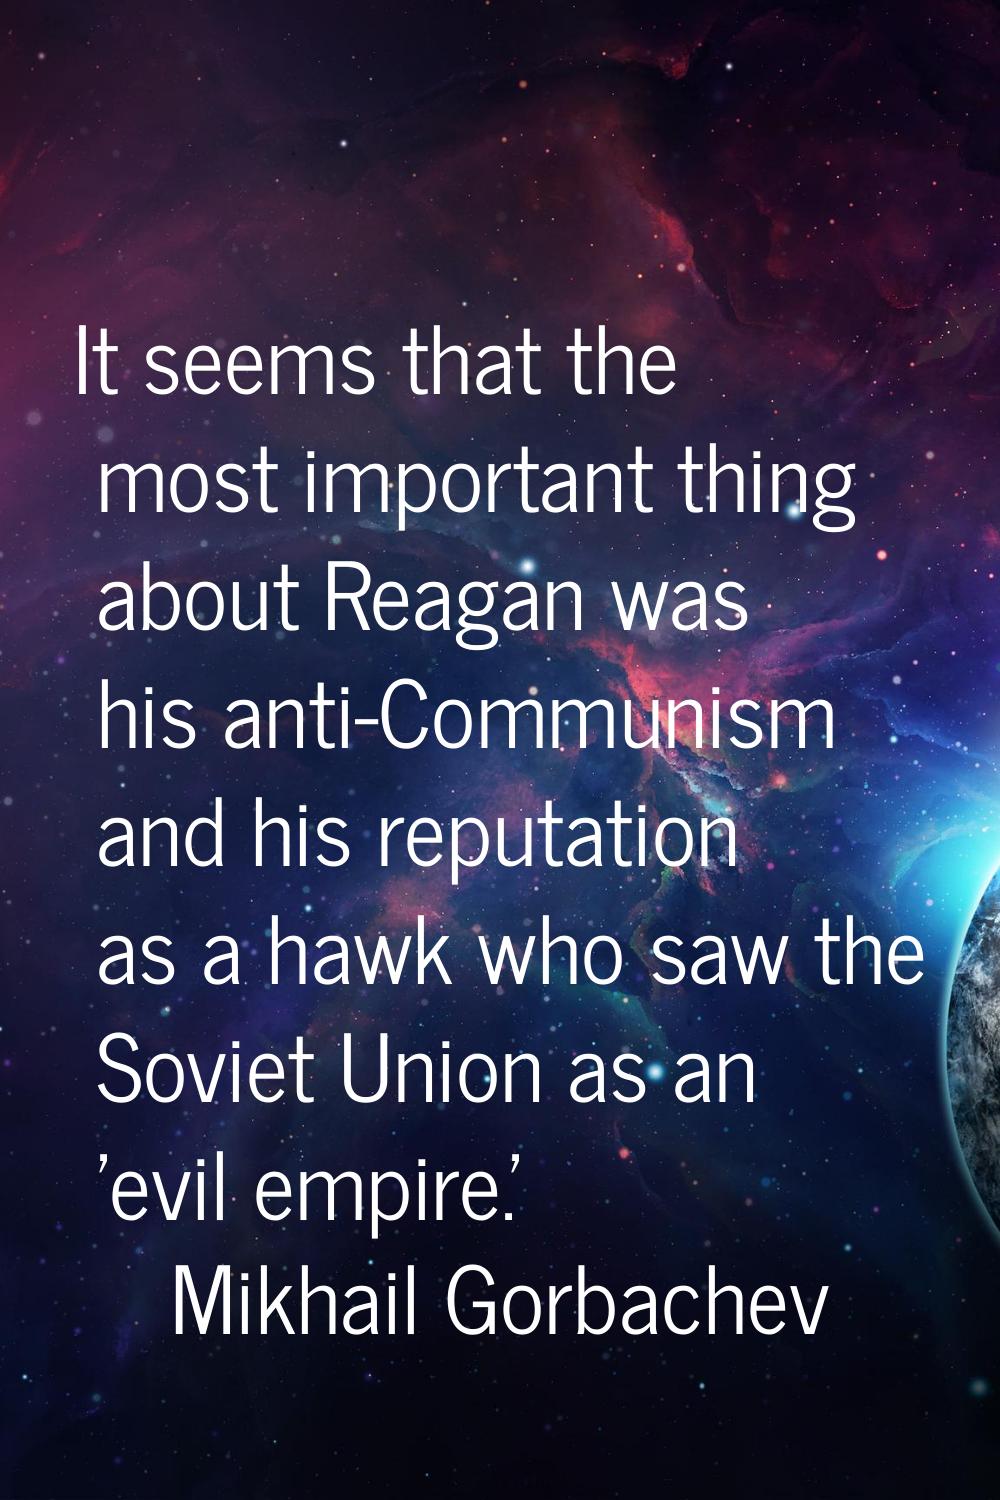 It seems that the most important thing about Reagan was his anti-Communism and his reputation as a 